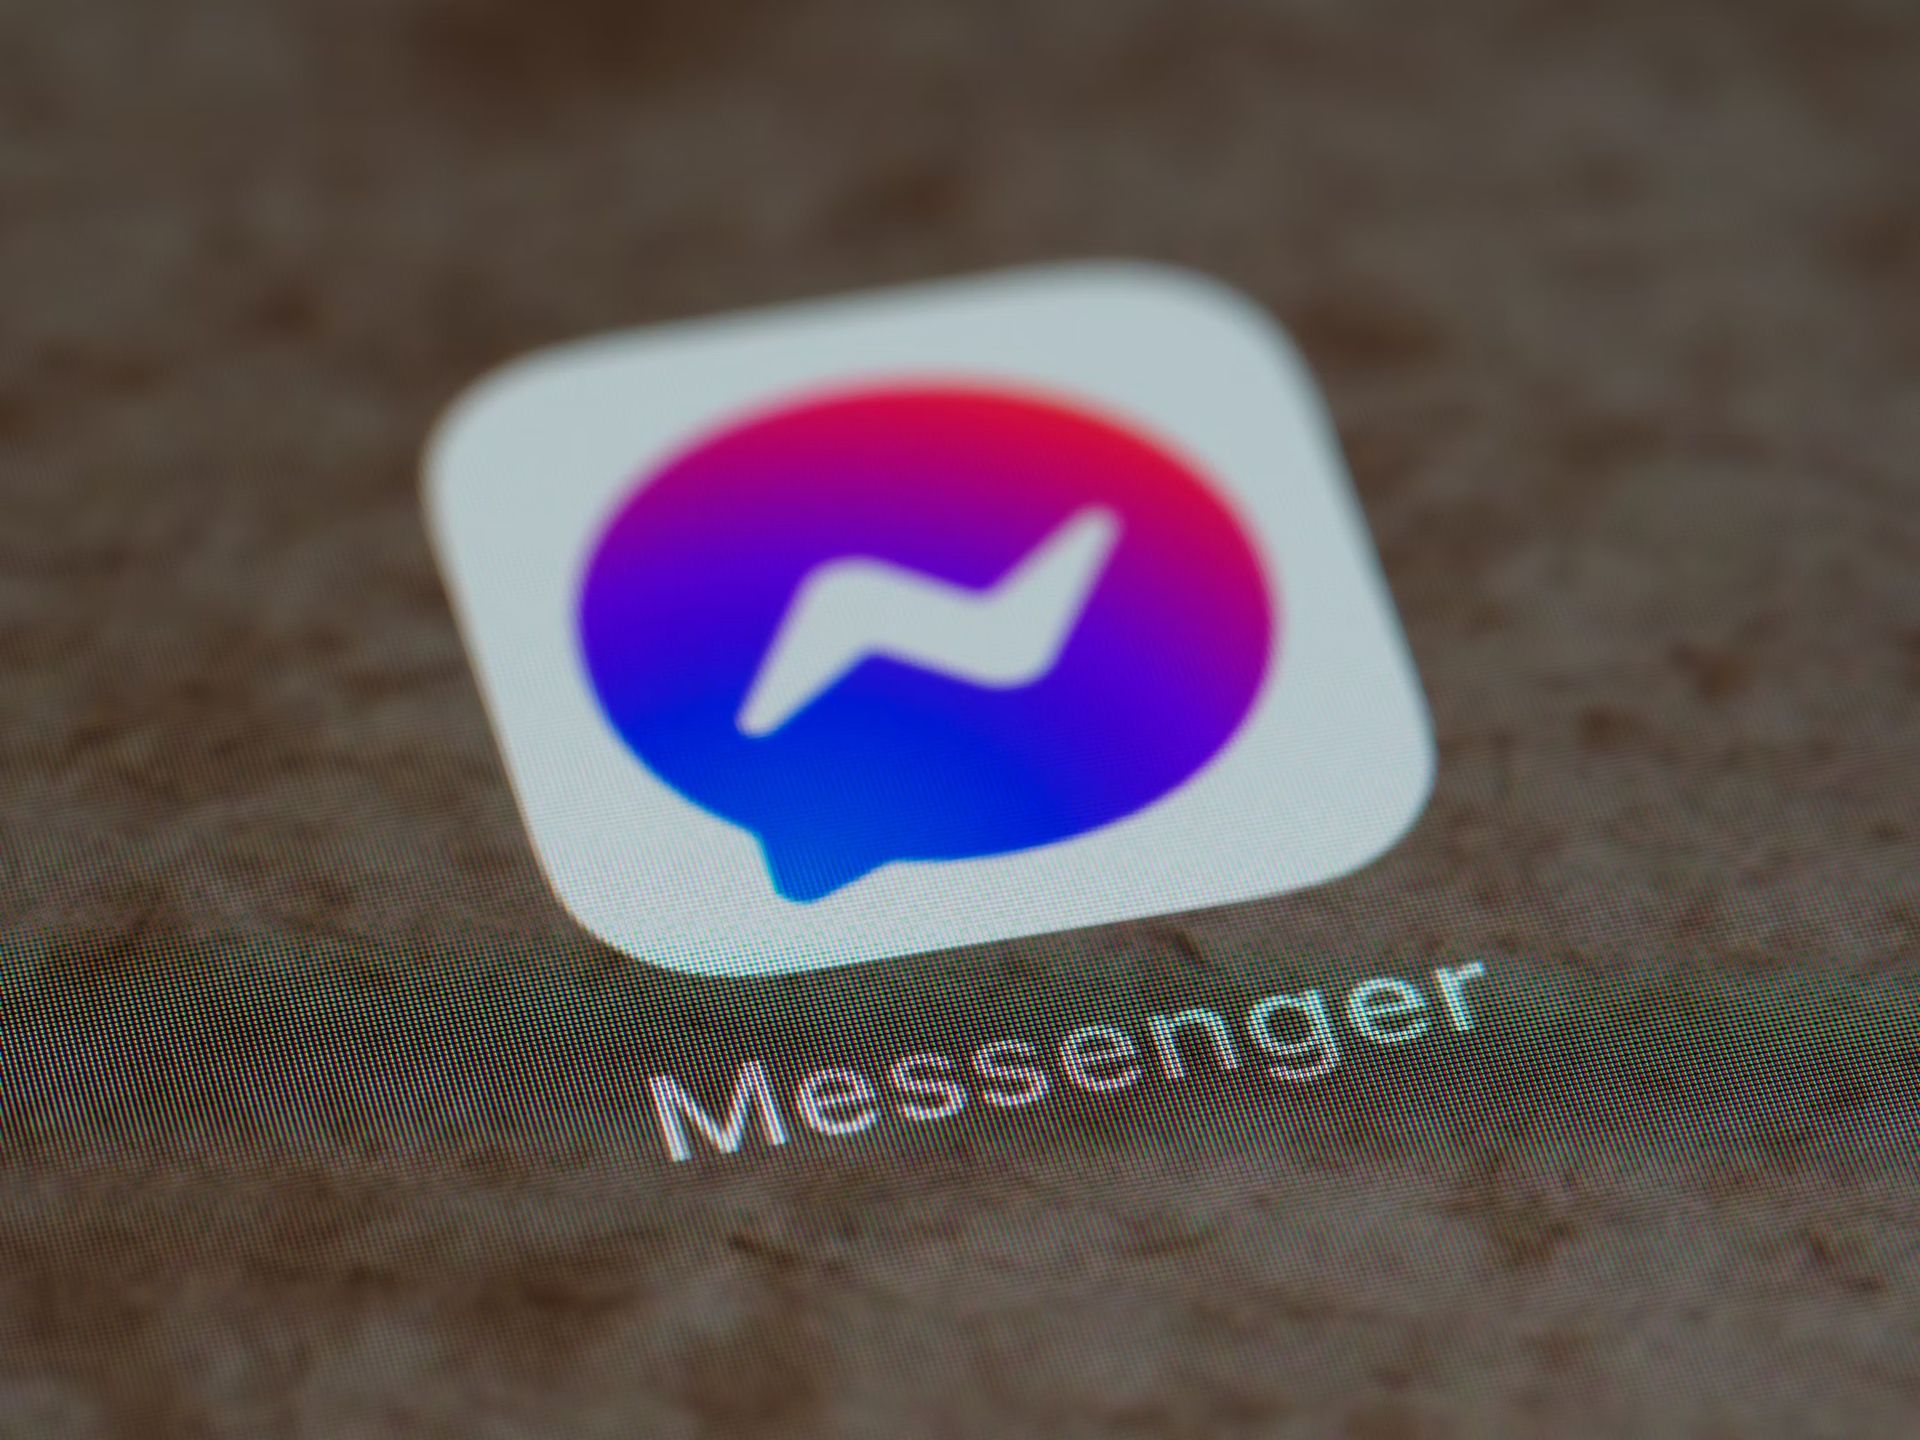 The aim of a new Facebook phishing scam, which Trustwave security experts have uncovered, is to steal user credentials by exploiting Messenger chatbots.